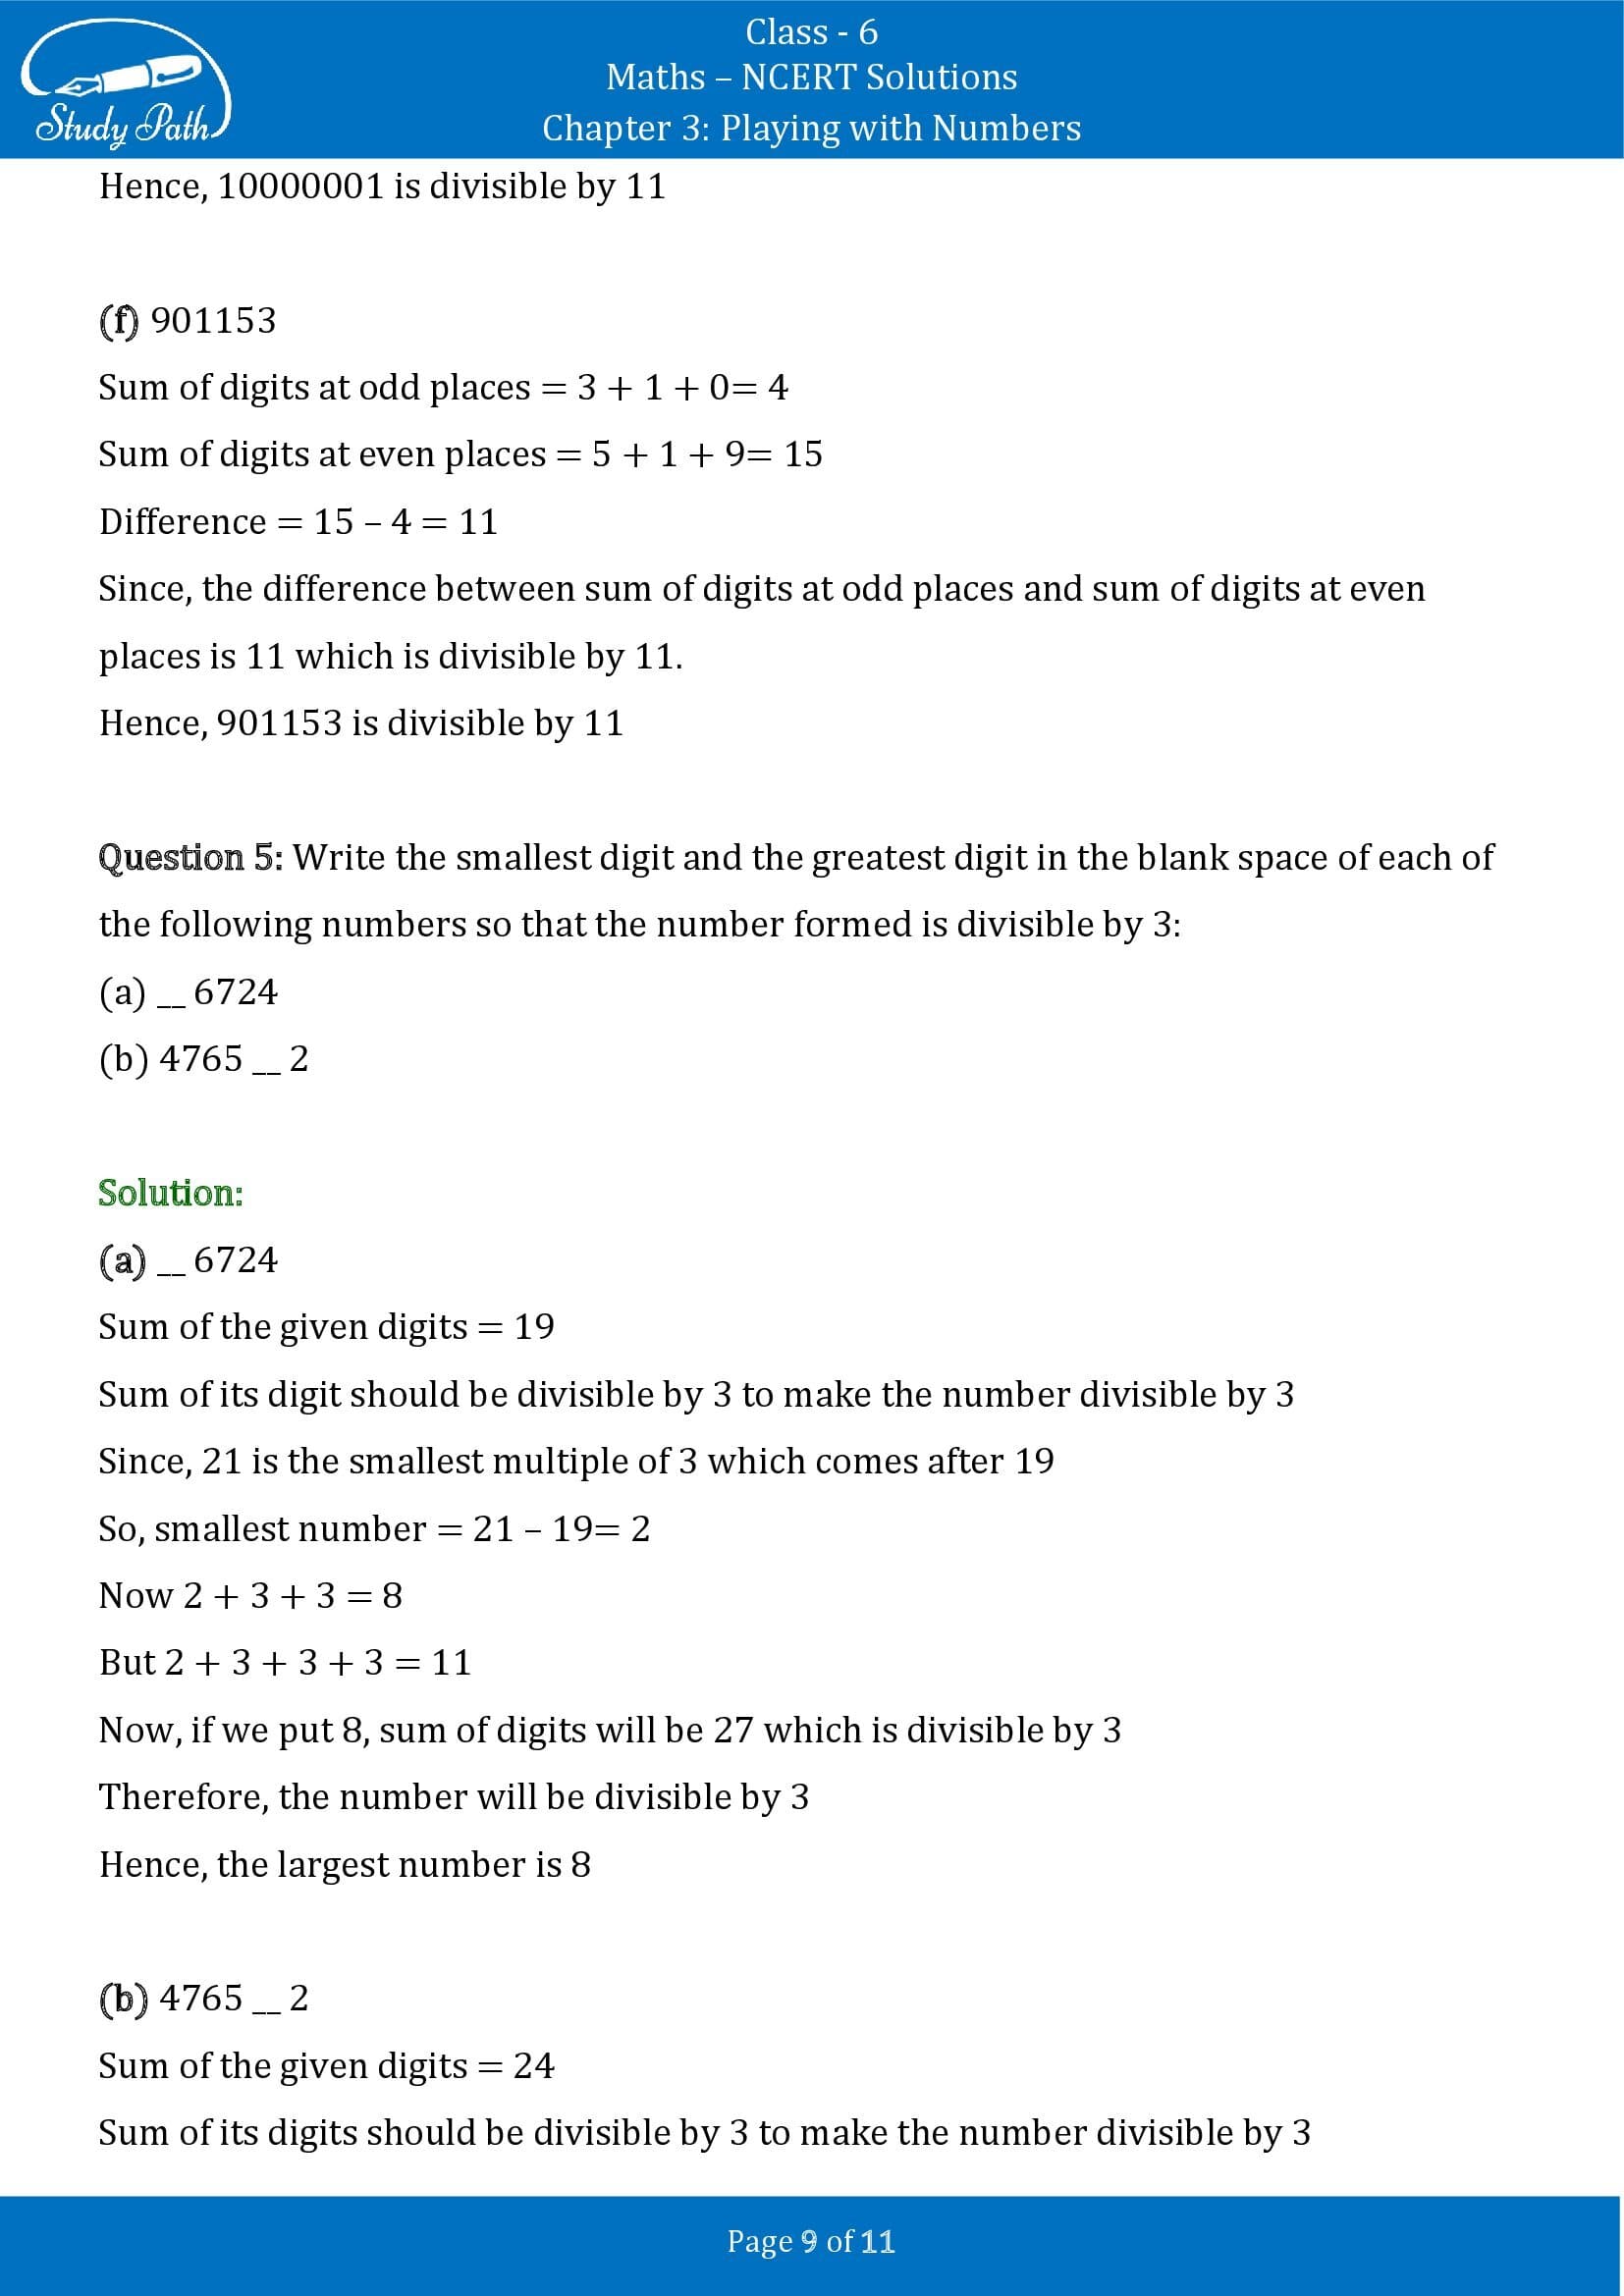 NCERT Solutions for Class 6 Maths Chapter 3 Playing with Numbers Exercise 3.3 00009